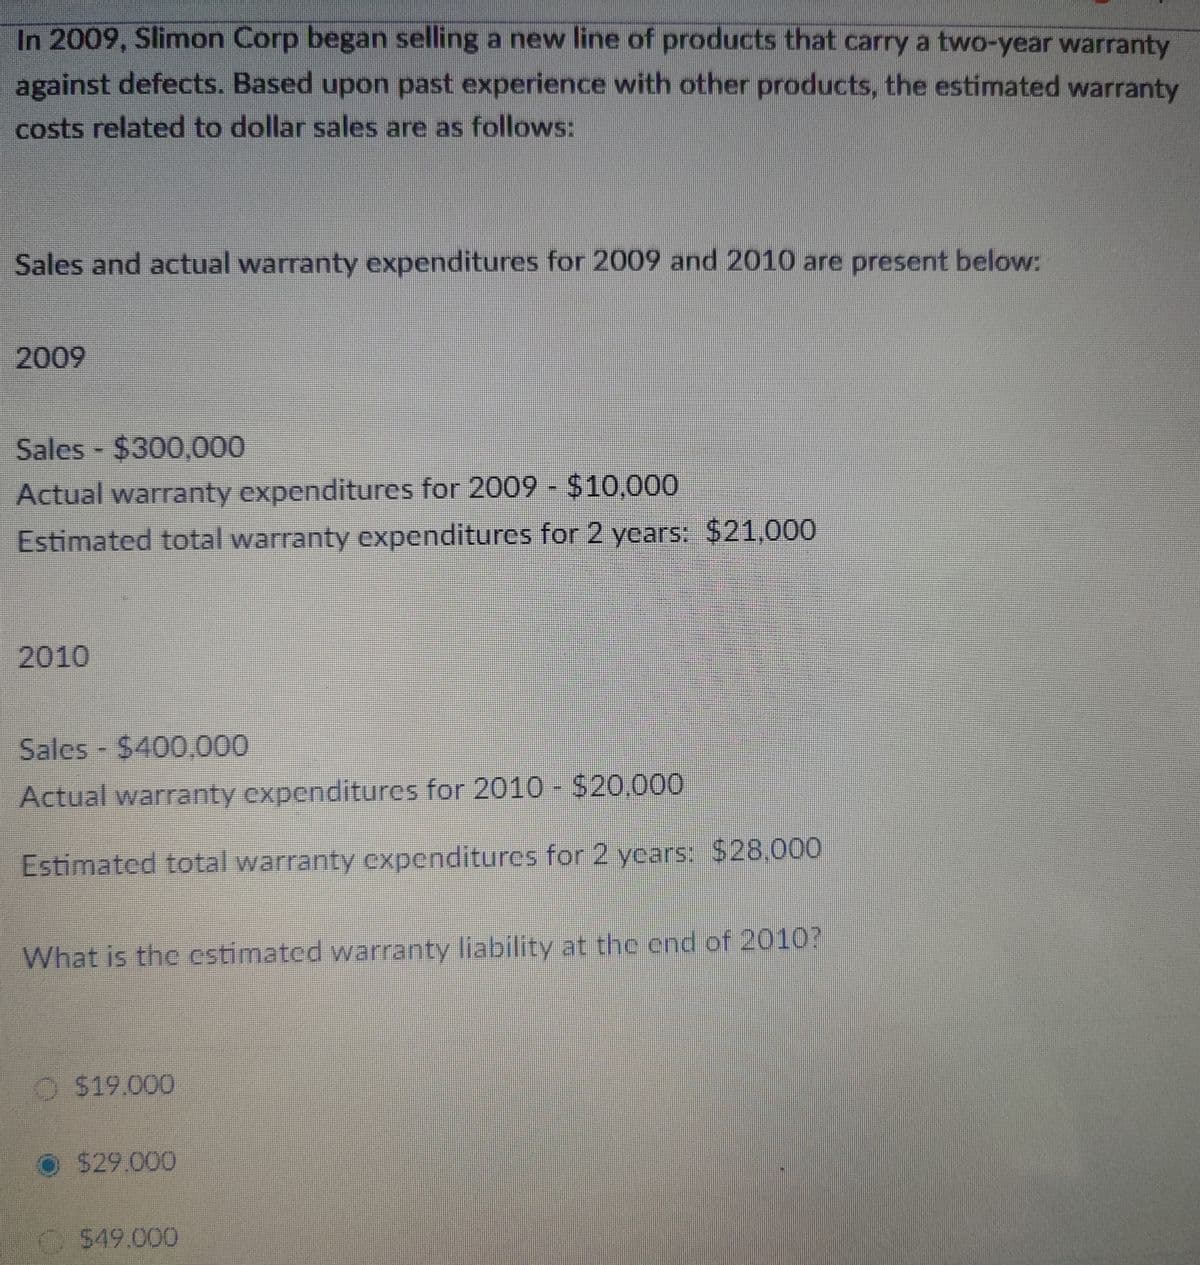 In 2009, Slimon Corp began selling a new line of products that carry a two-year warranty
against defects. Based upon past experience with other products, the estimated warranty
costs related to dollar sales are as follows:
Sales and actual warranty expenditures for 2009 and 2010 are present below:
2009
Sales - $300,000
Actual warranty expenditures for 2009 - $10,000
Estimated total warranty expenditures for 2 years: $21,000
2010
Sales - $400,000
Actual warranty expenditures for 2010 - $20,000
Estimated total warranty expenditures for 2 years: $28,000
What is the estimated warranty liability at the end of 2010?
$19,000
$29.000
$49,000